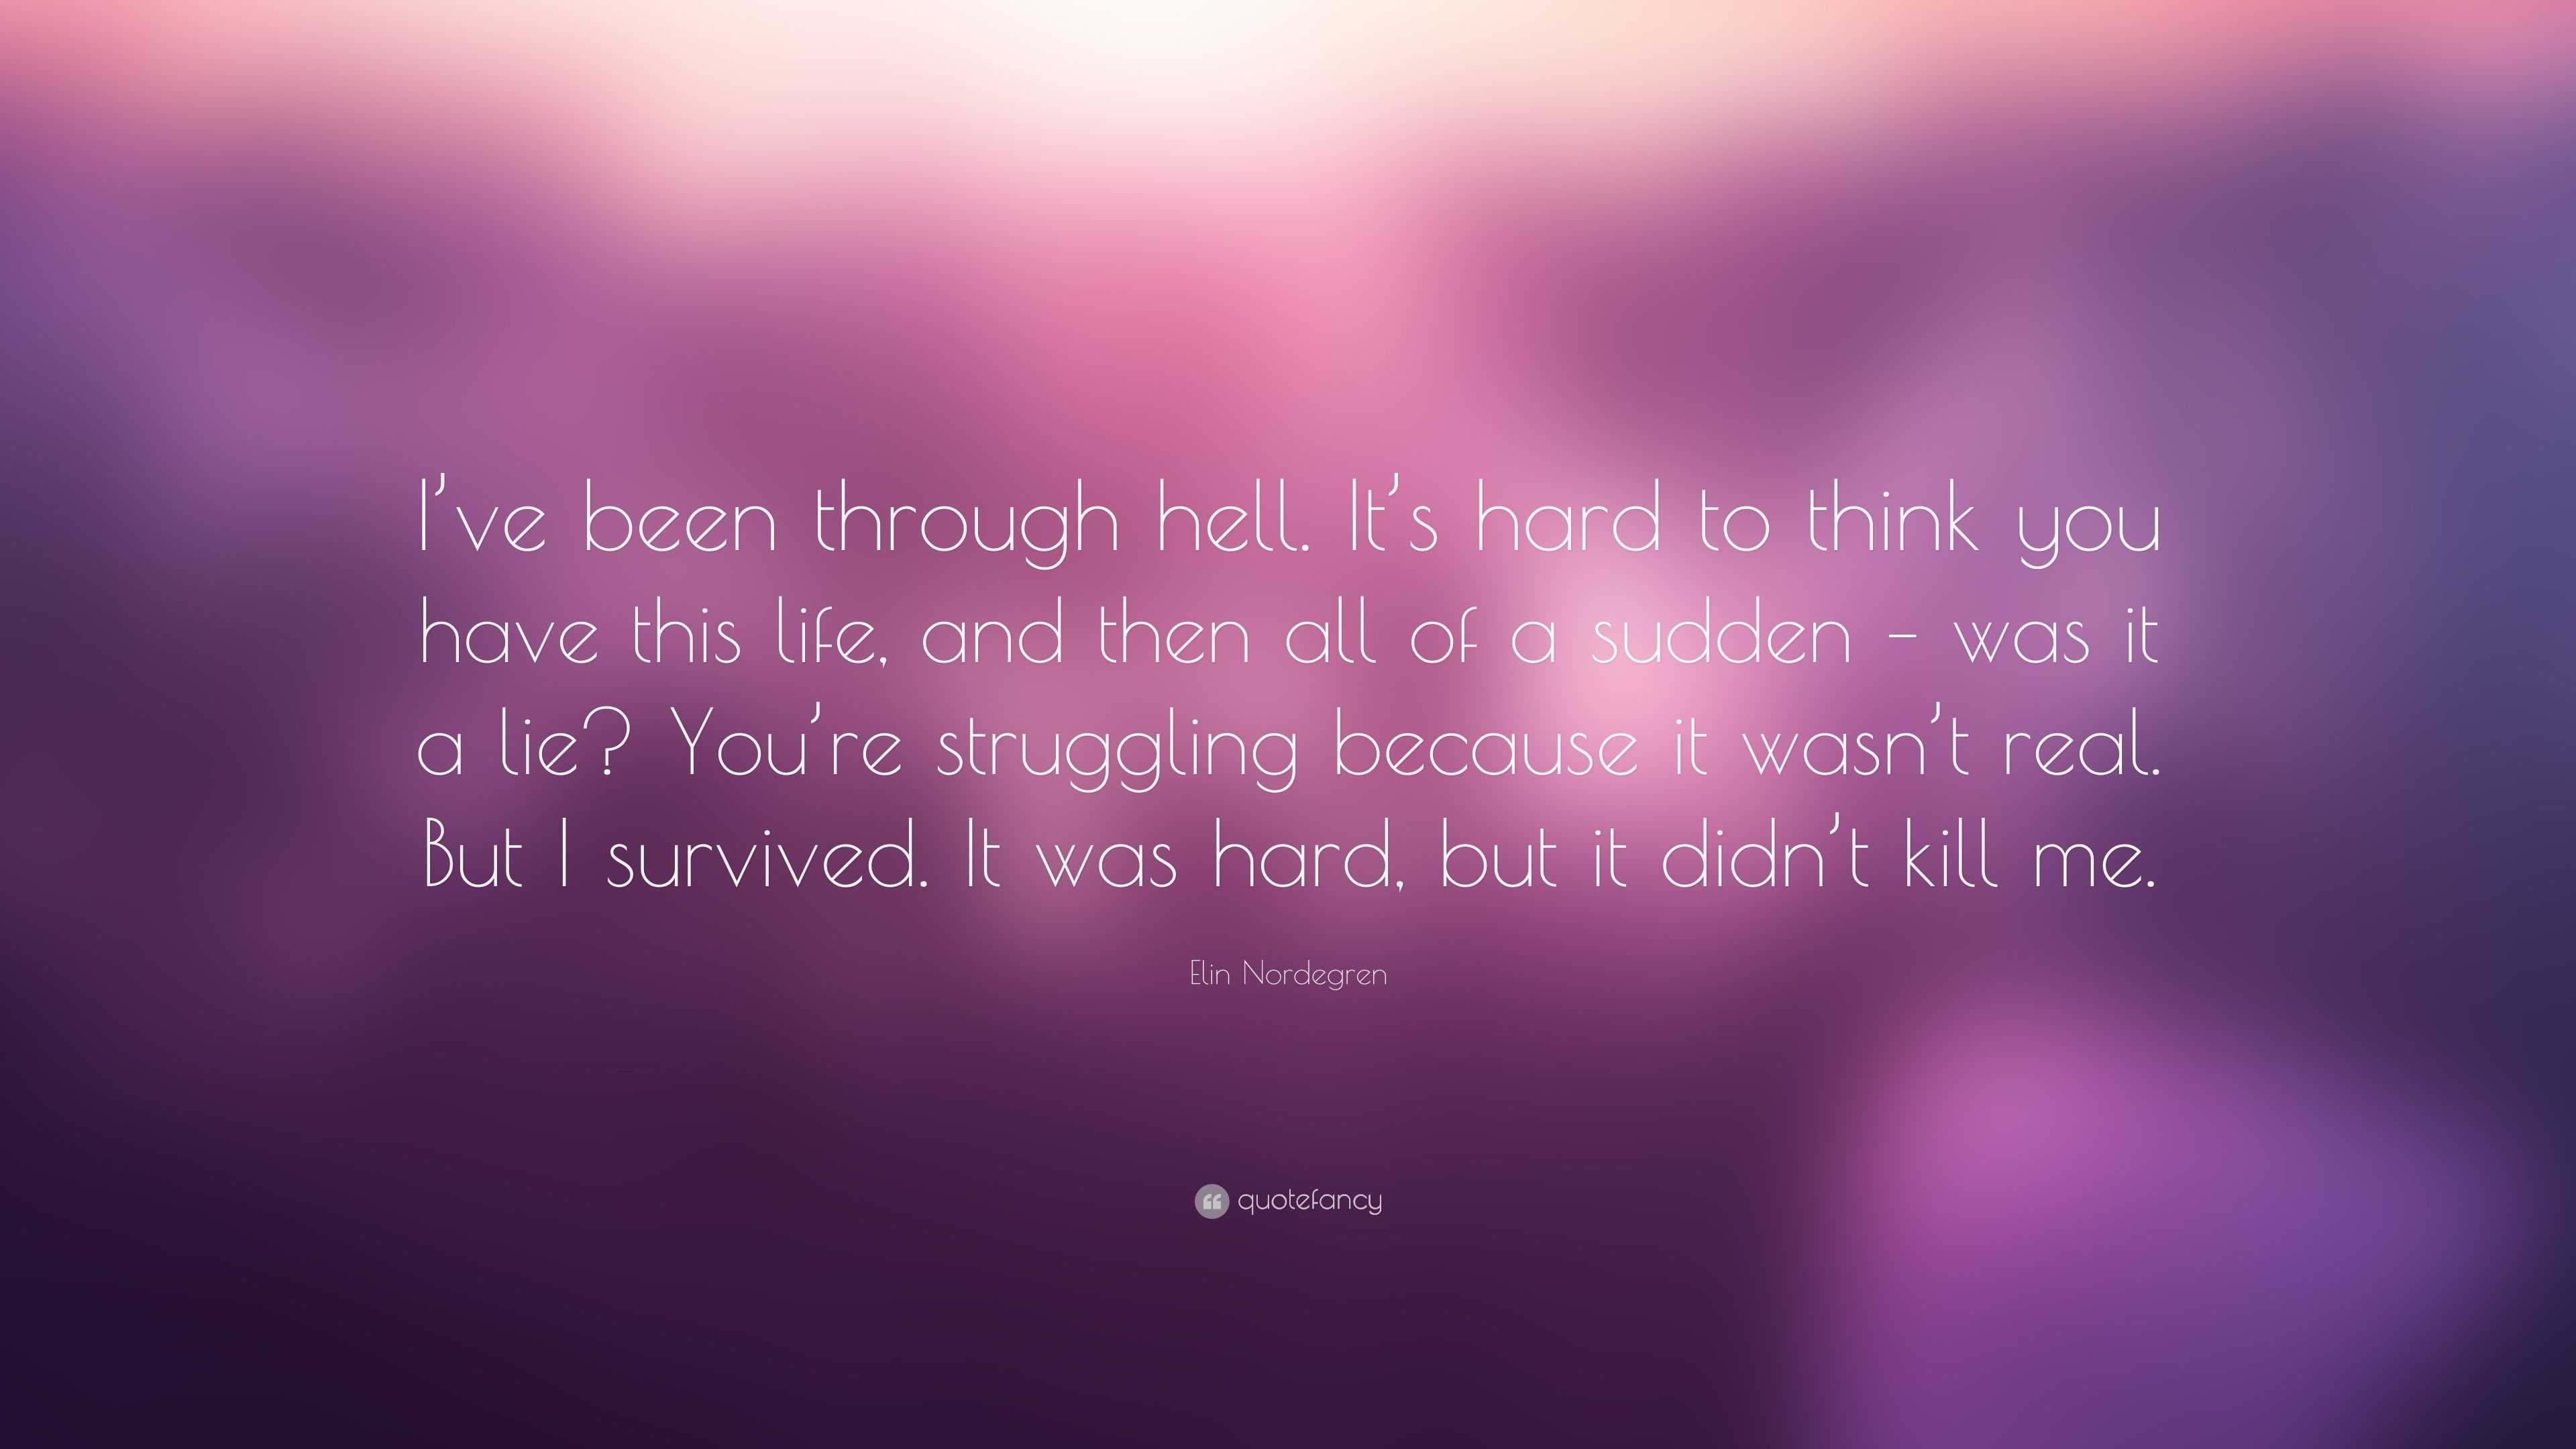 Elin Nordegren Quote: “I’ve been through hell. It’s hard to think you ...